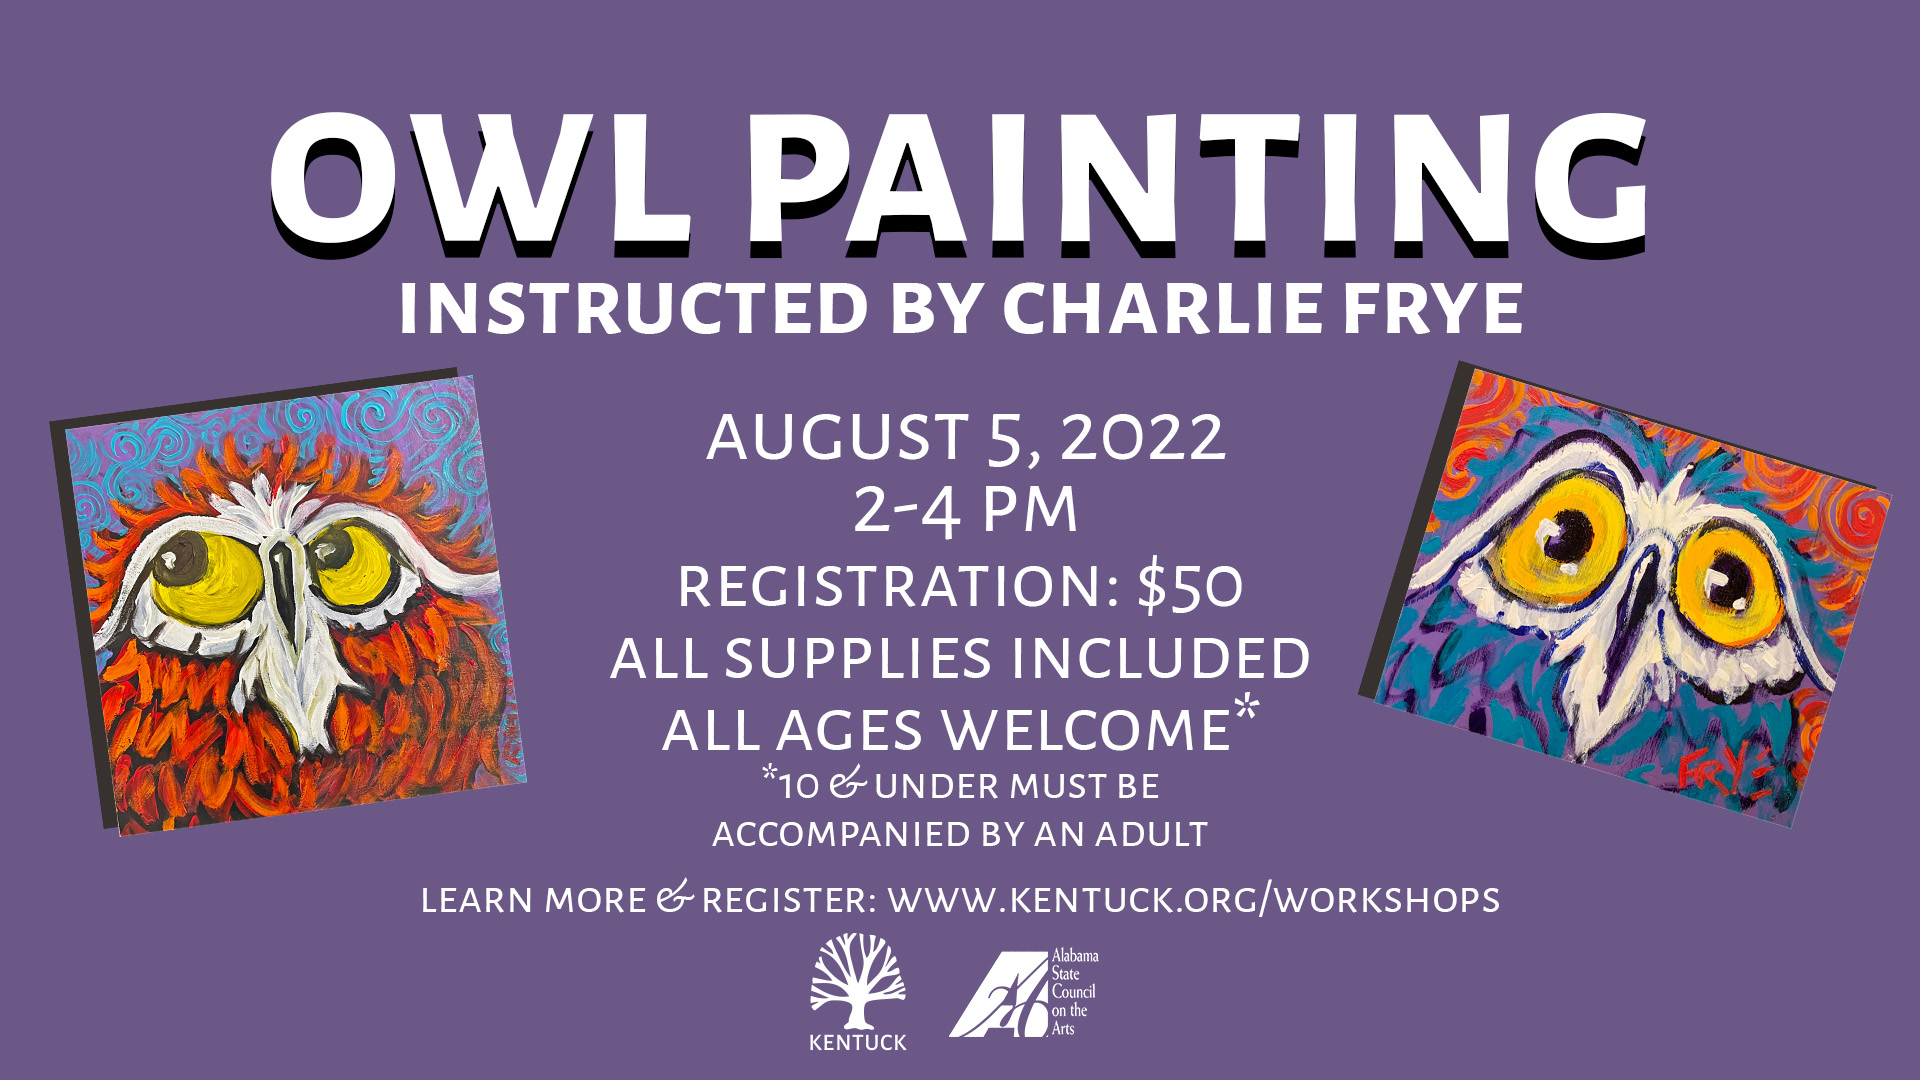 Owl Painting with Charlie Frye